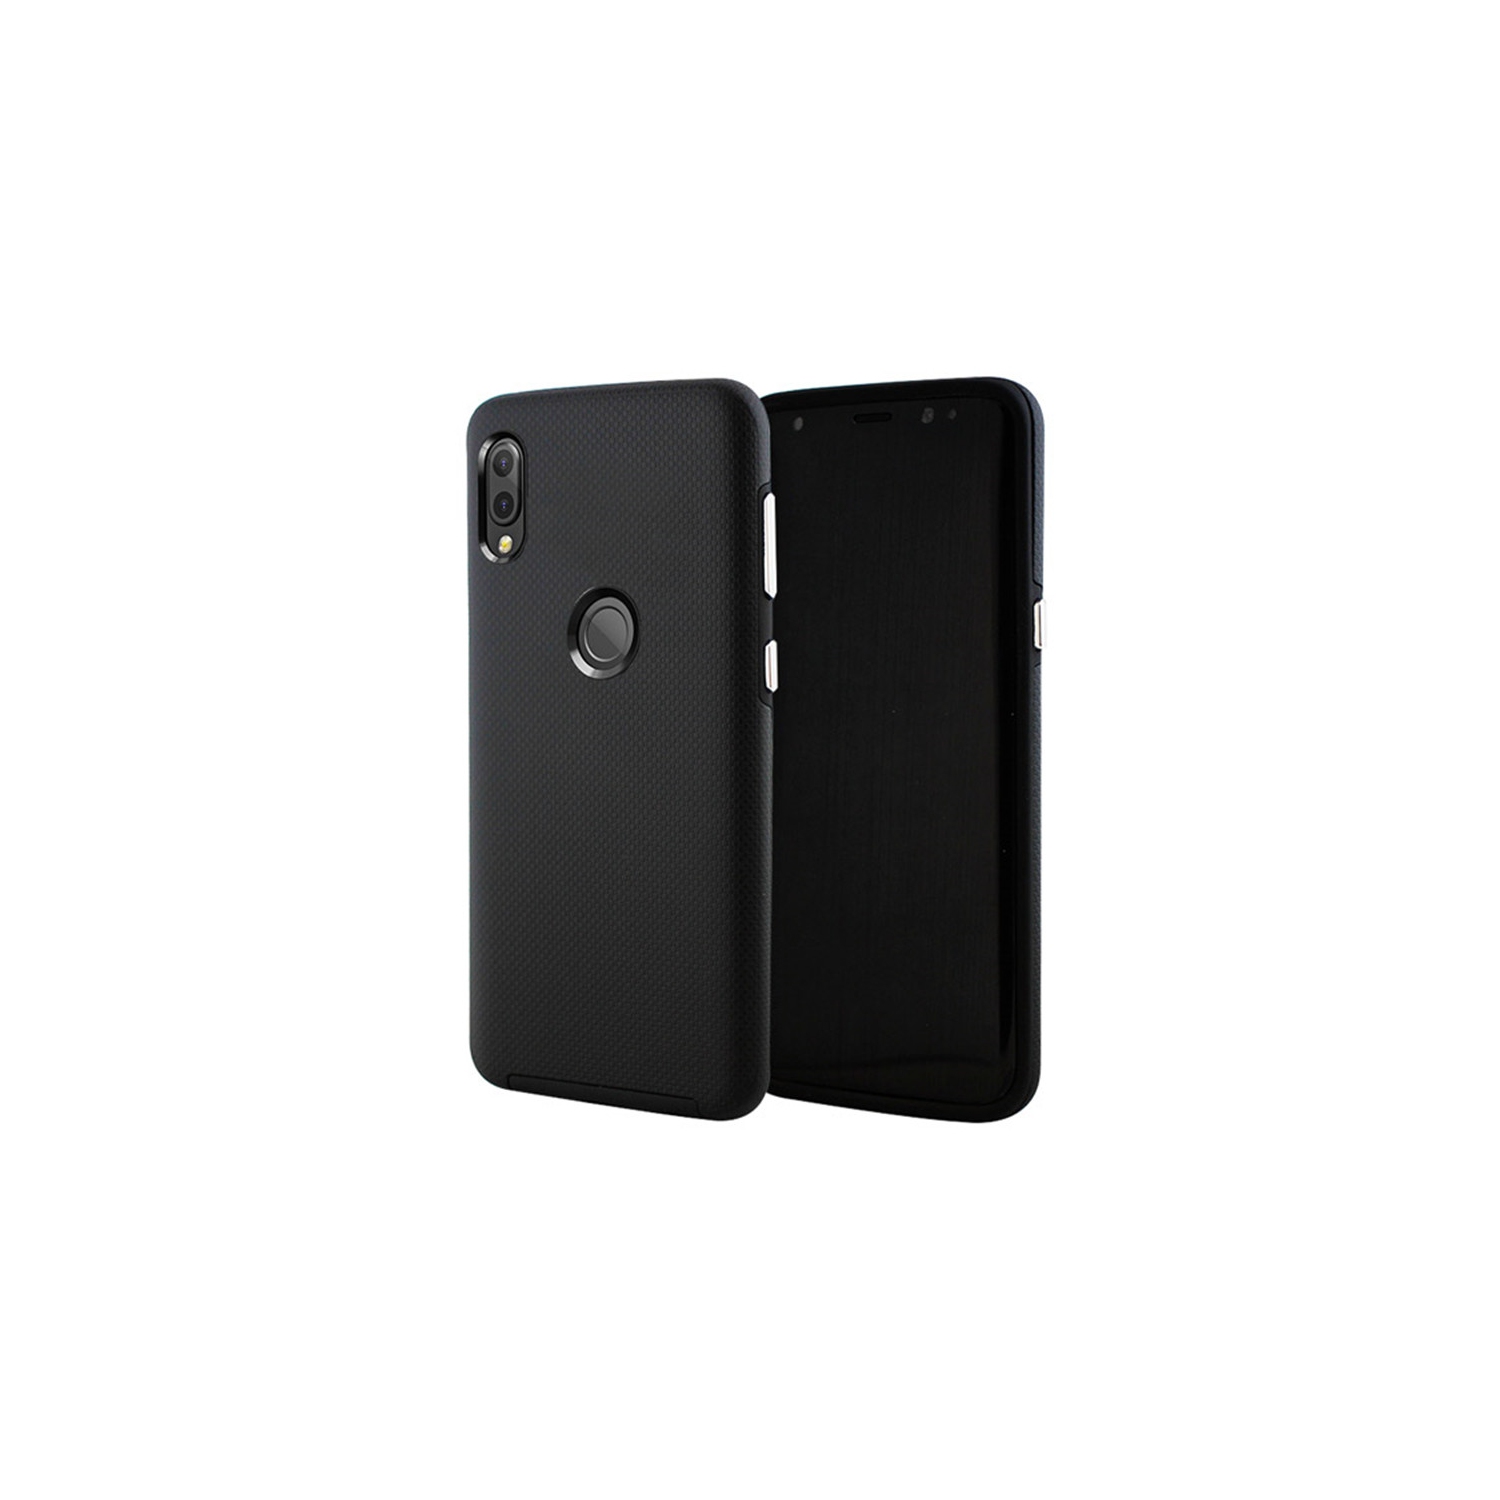 【CSmart】 Slim Fitted Hybrid Hard PC Shell Shockproof Scratch Resistant Case Cover for Huawei P20 Lite, Black